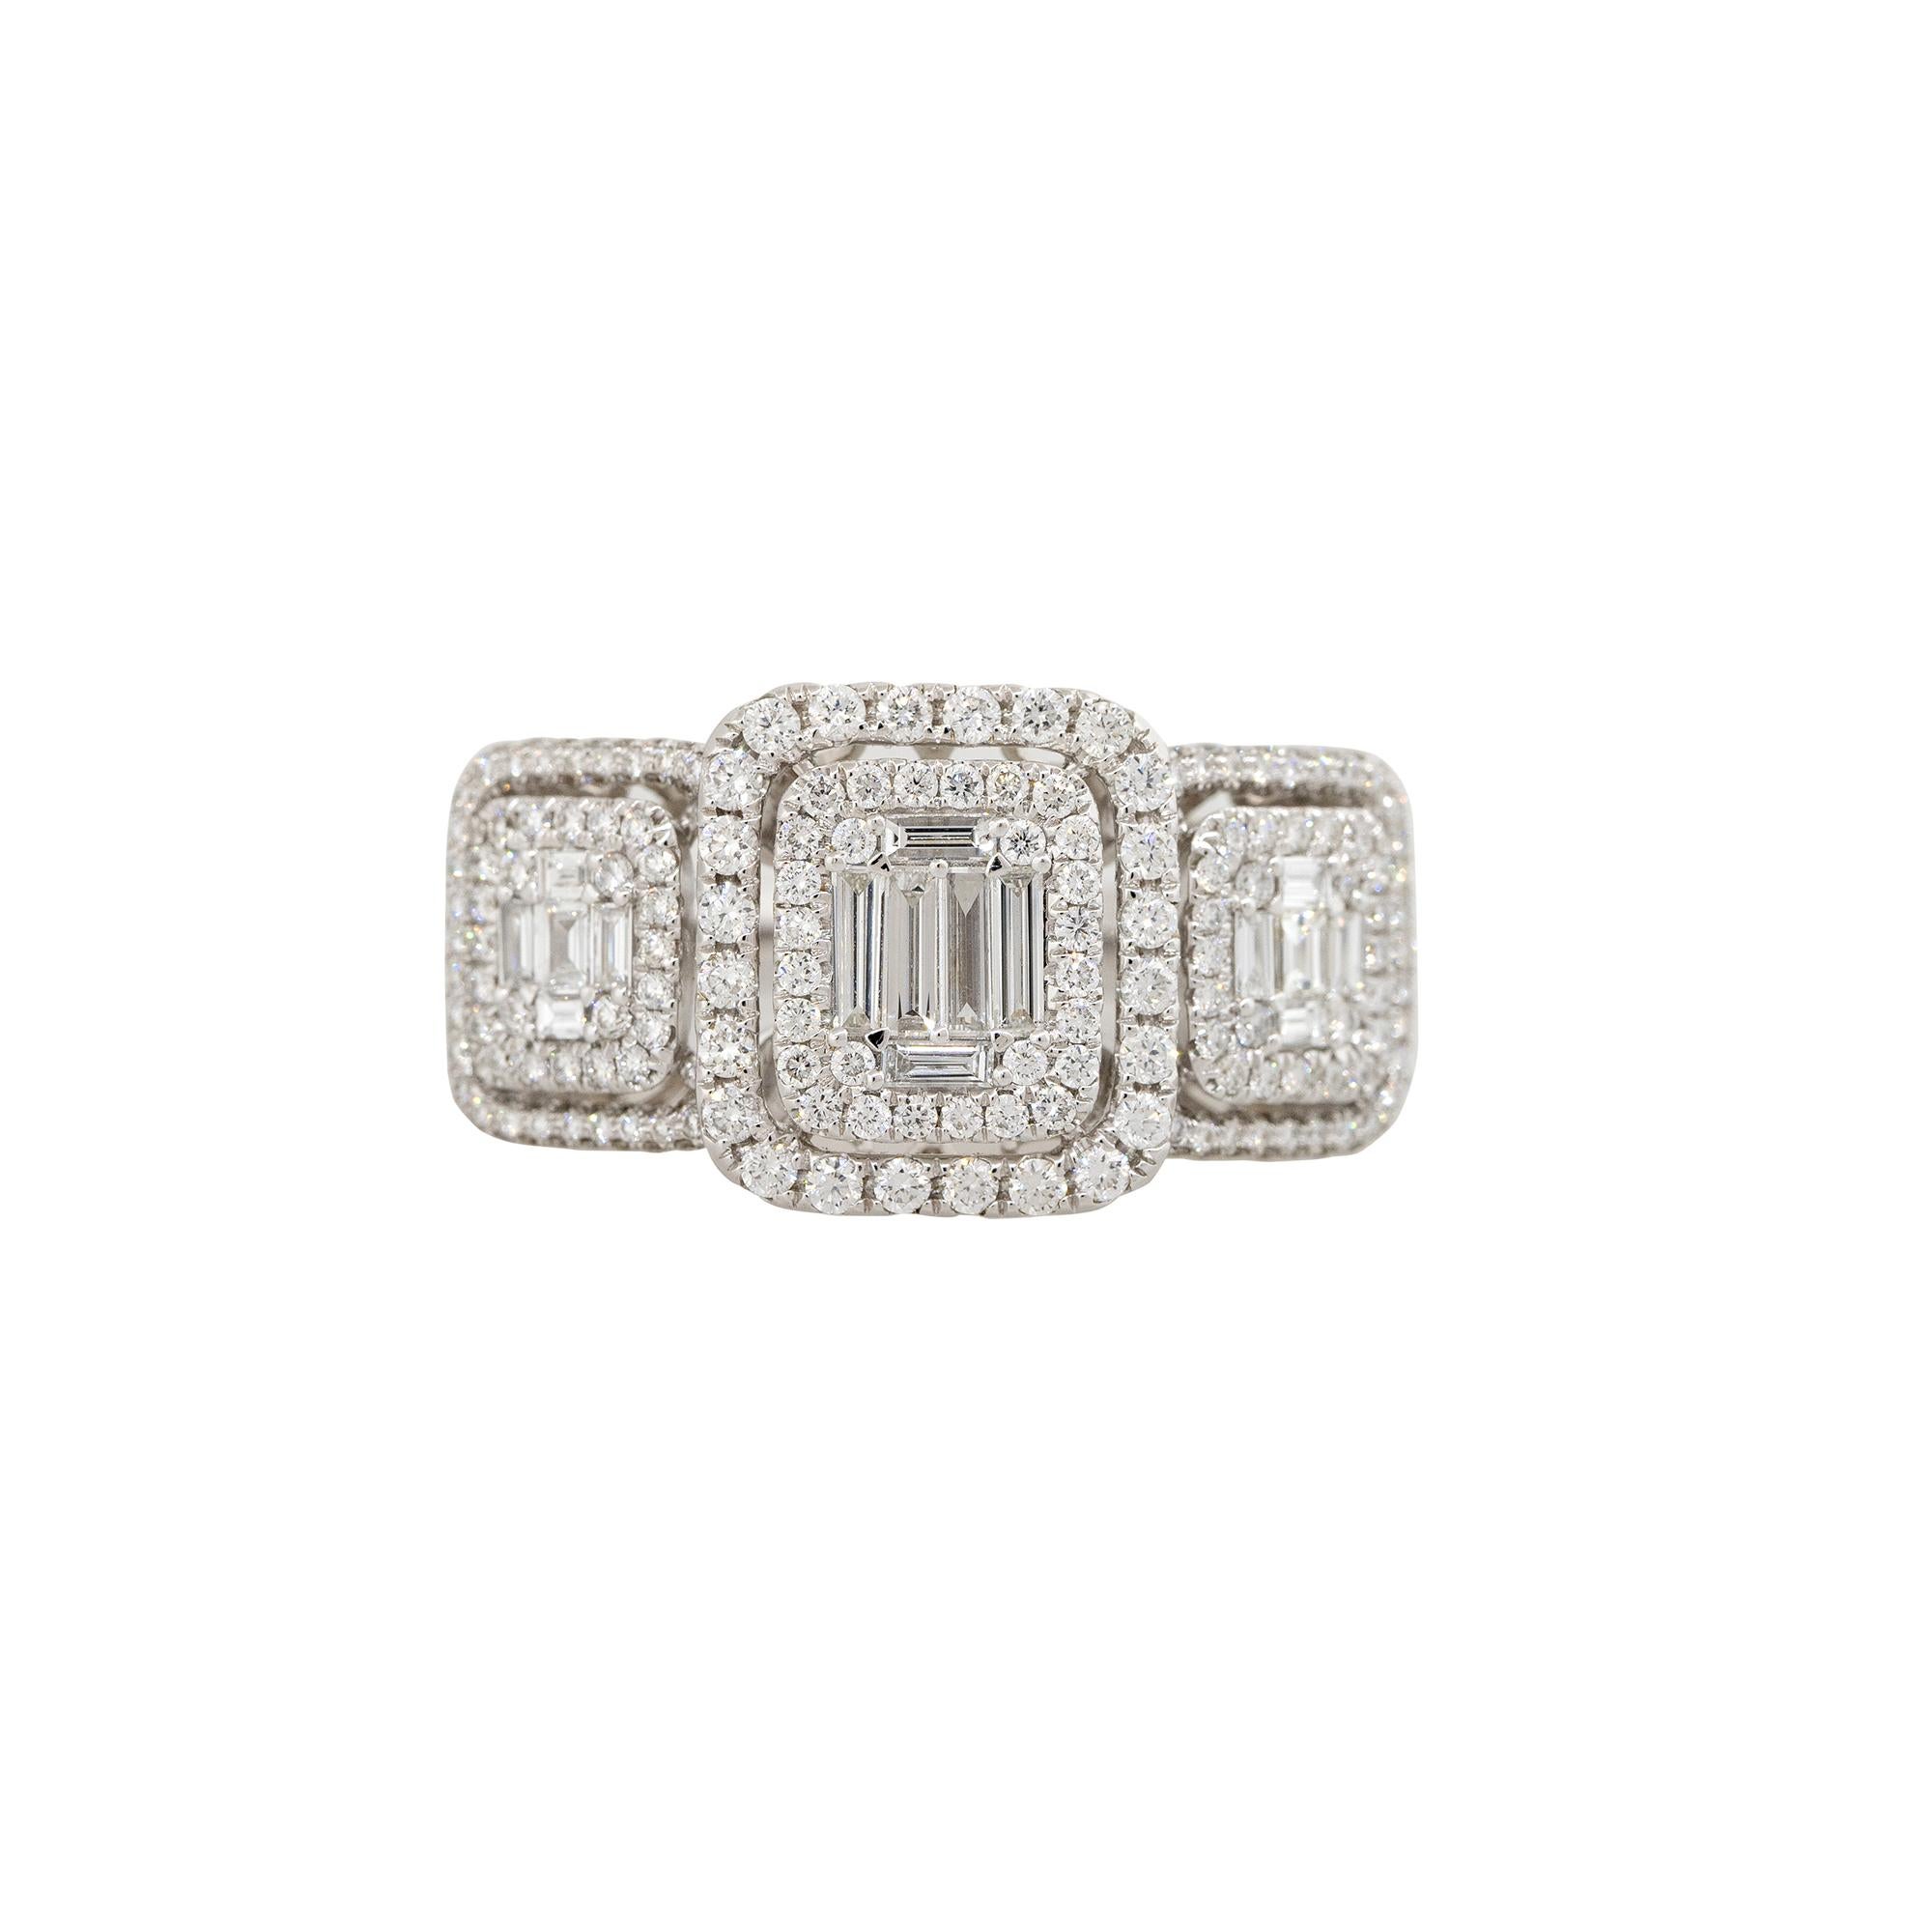 18k White Gold 2.45ctw Mosaic Diamond 3 Station Ring

Product: Large 3-Station Diamond Band
Material: 18k White Gold
Diamond Details: There are approximately 2.45 carats of Baguette and Round Brilliant cut diamonds. There are 382 stones